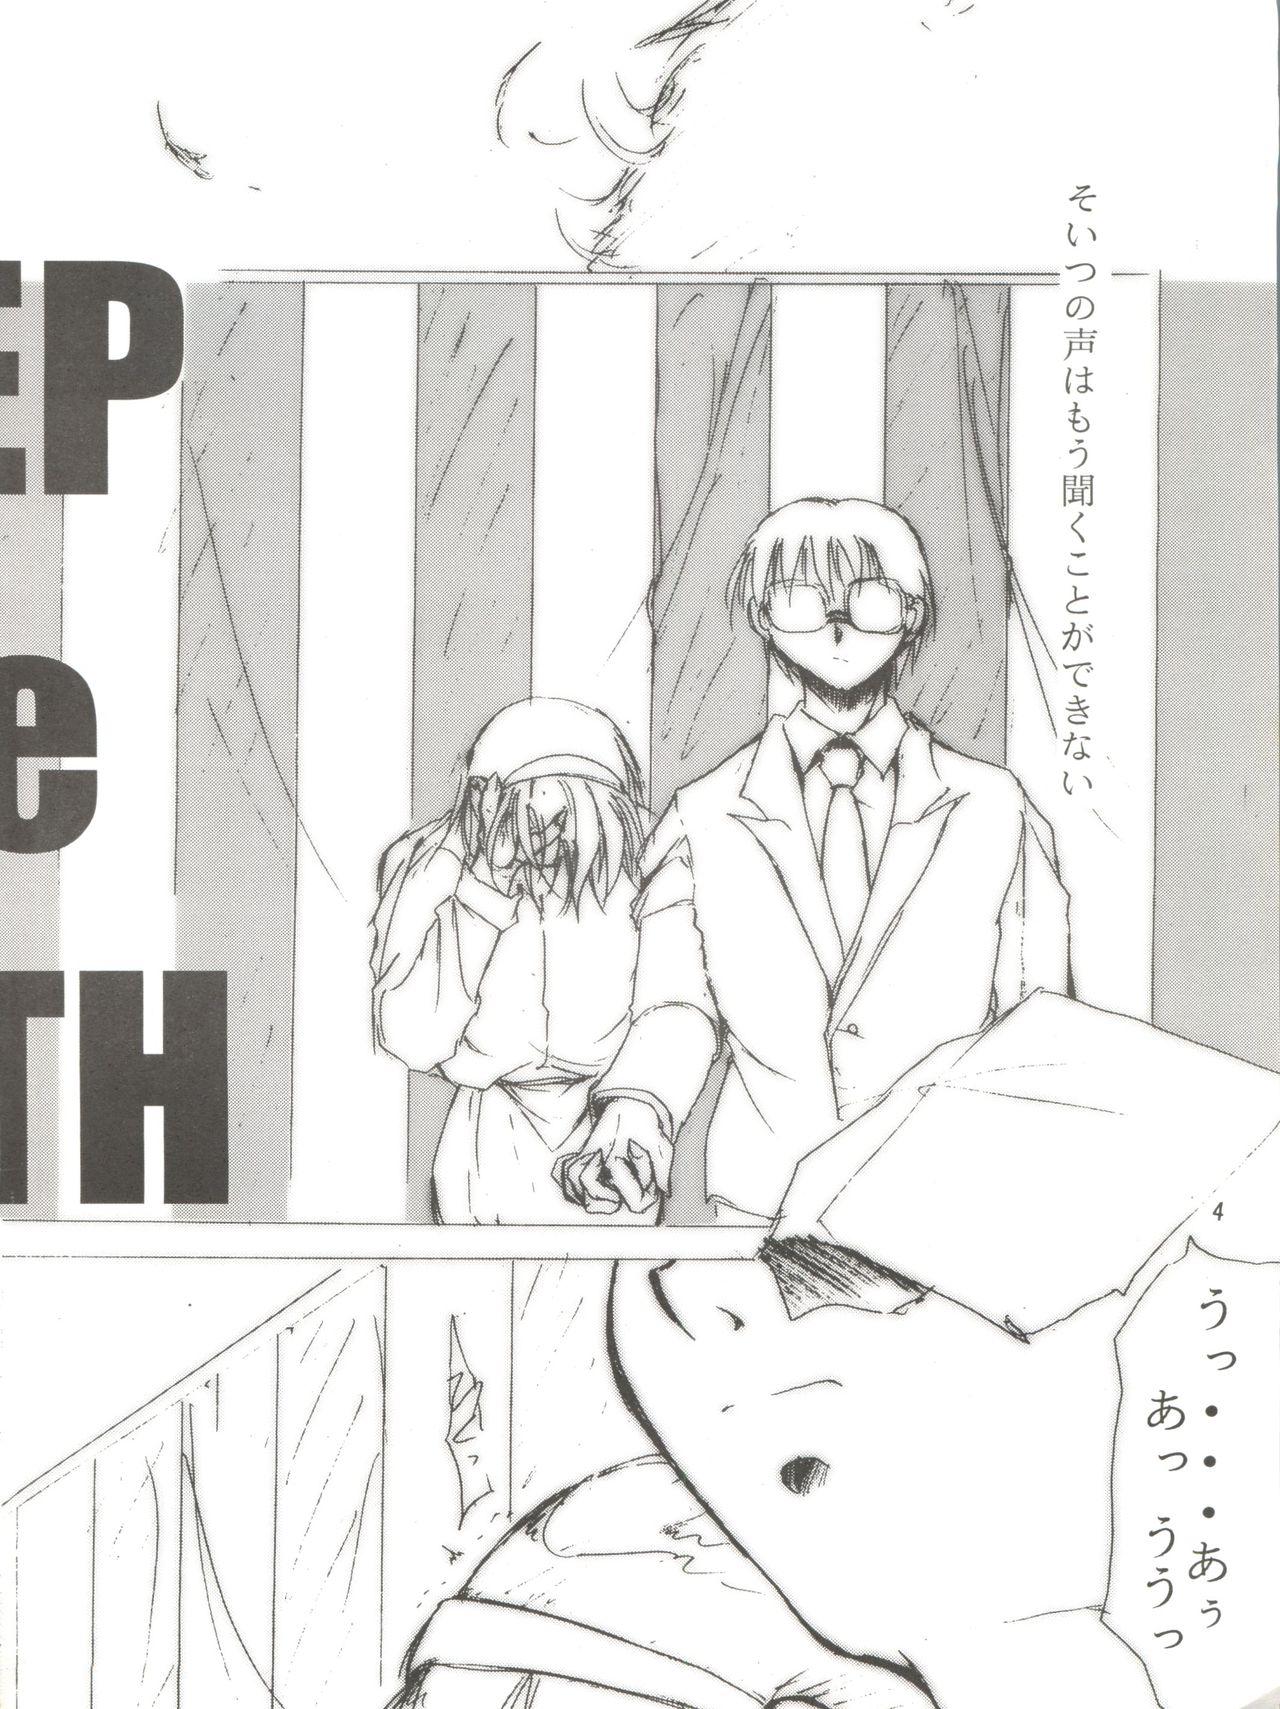 Asian Keep the Faith - Saber marionette Kare kano Mamotte shugogetten Adolescente - Page 3